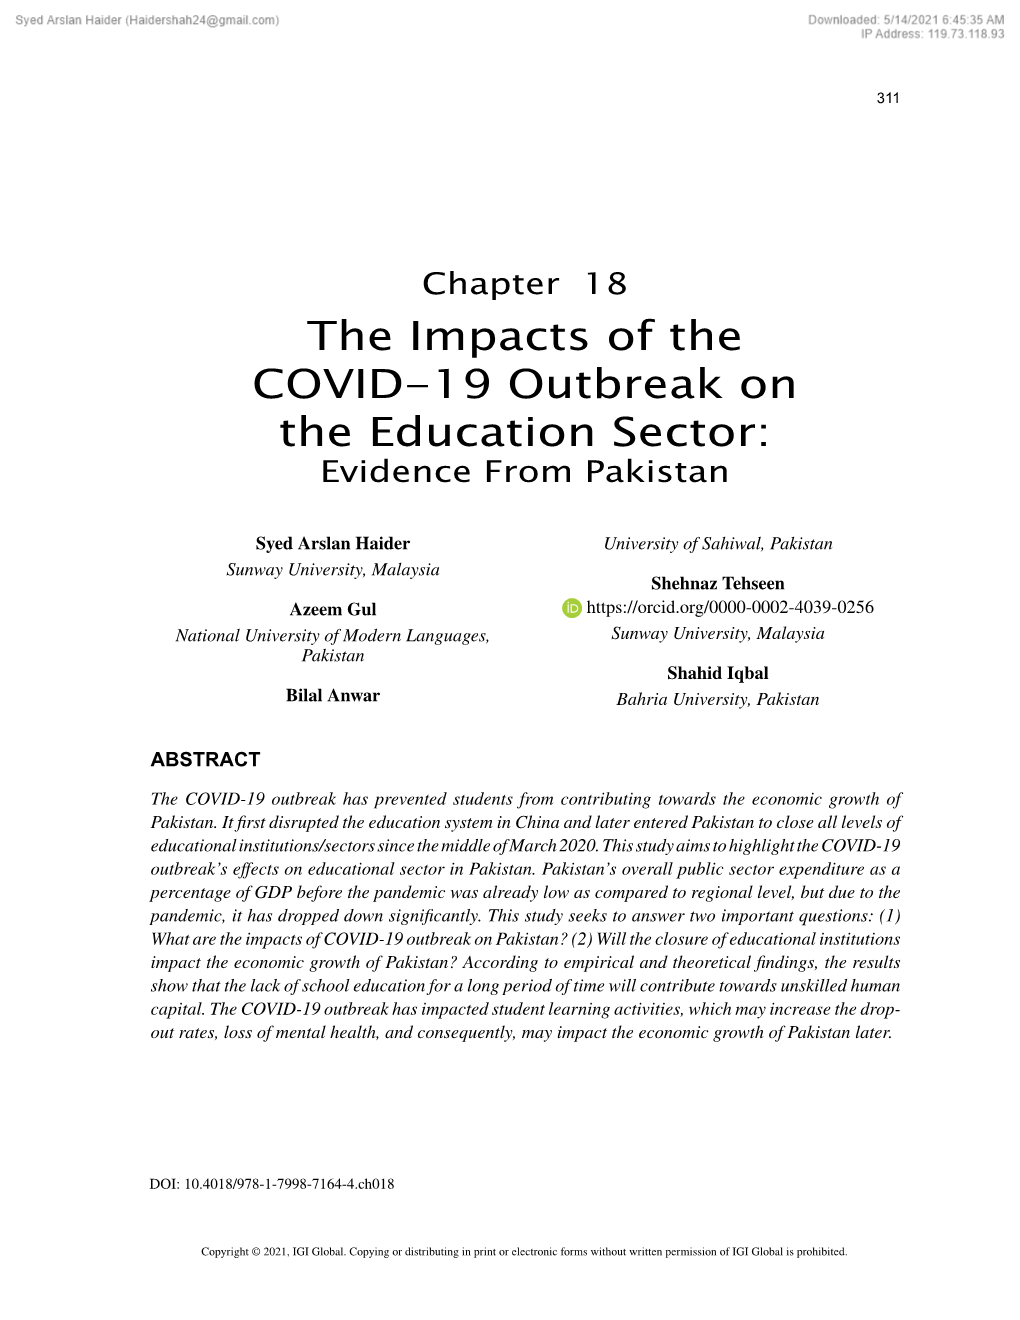 The Impacts of the COVID-19 Outbreak on the Education Sector: Evidence from Pakistan